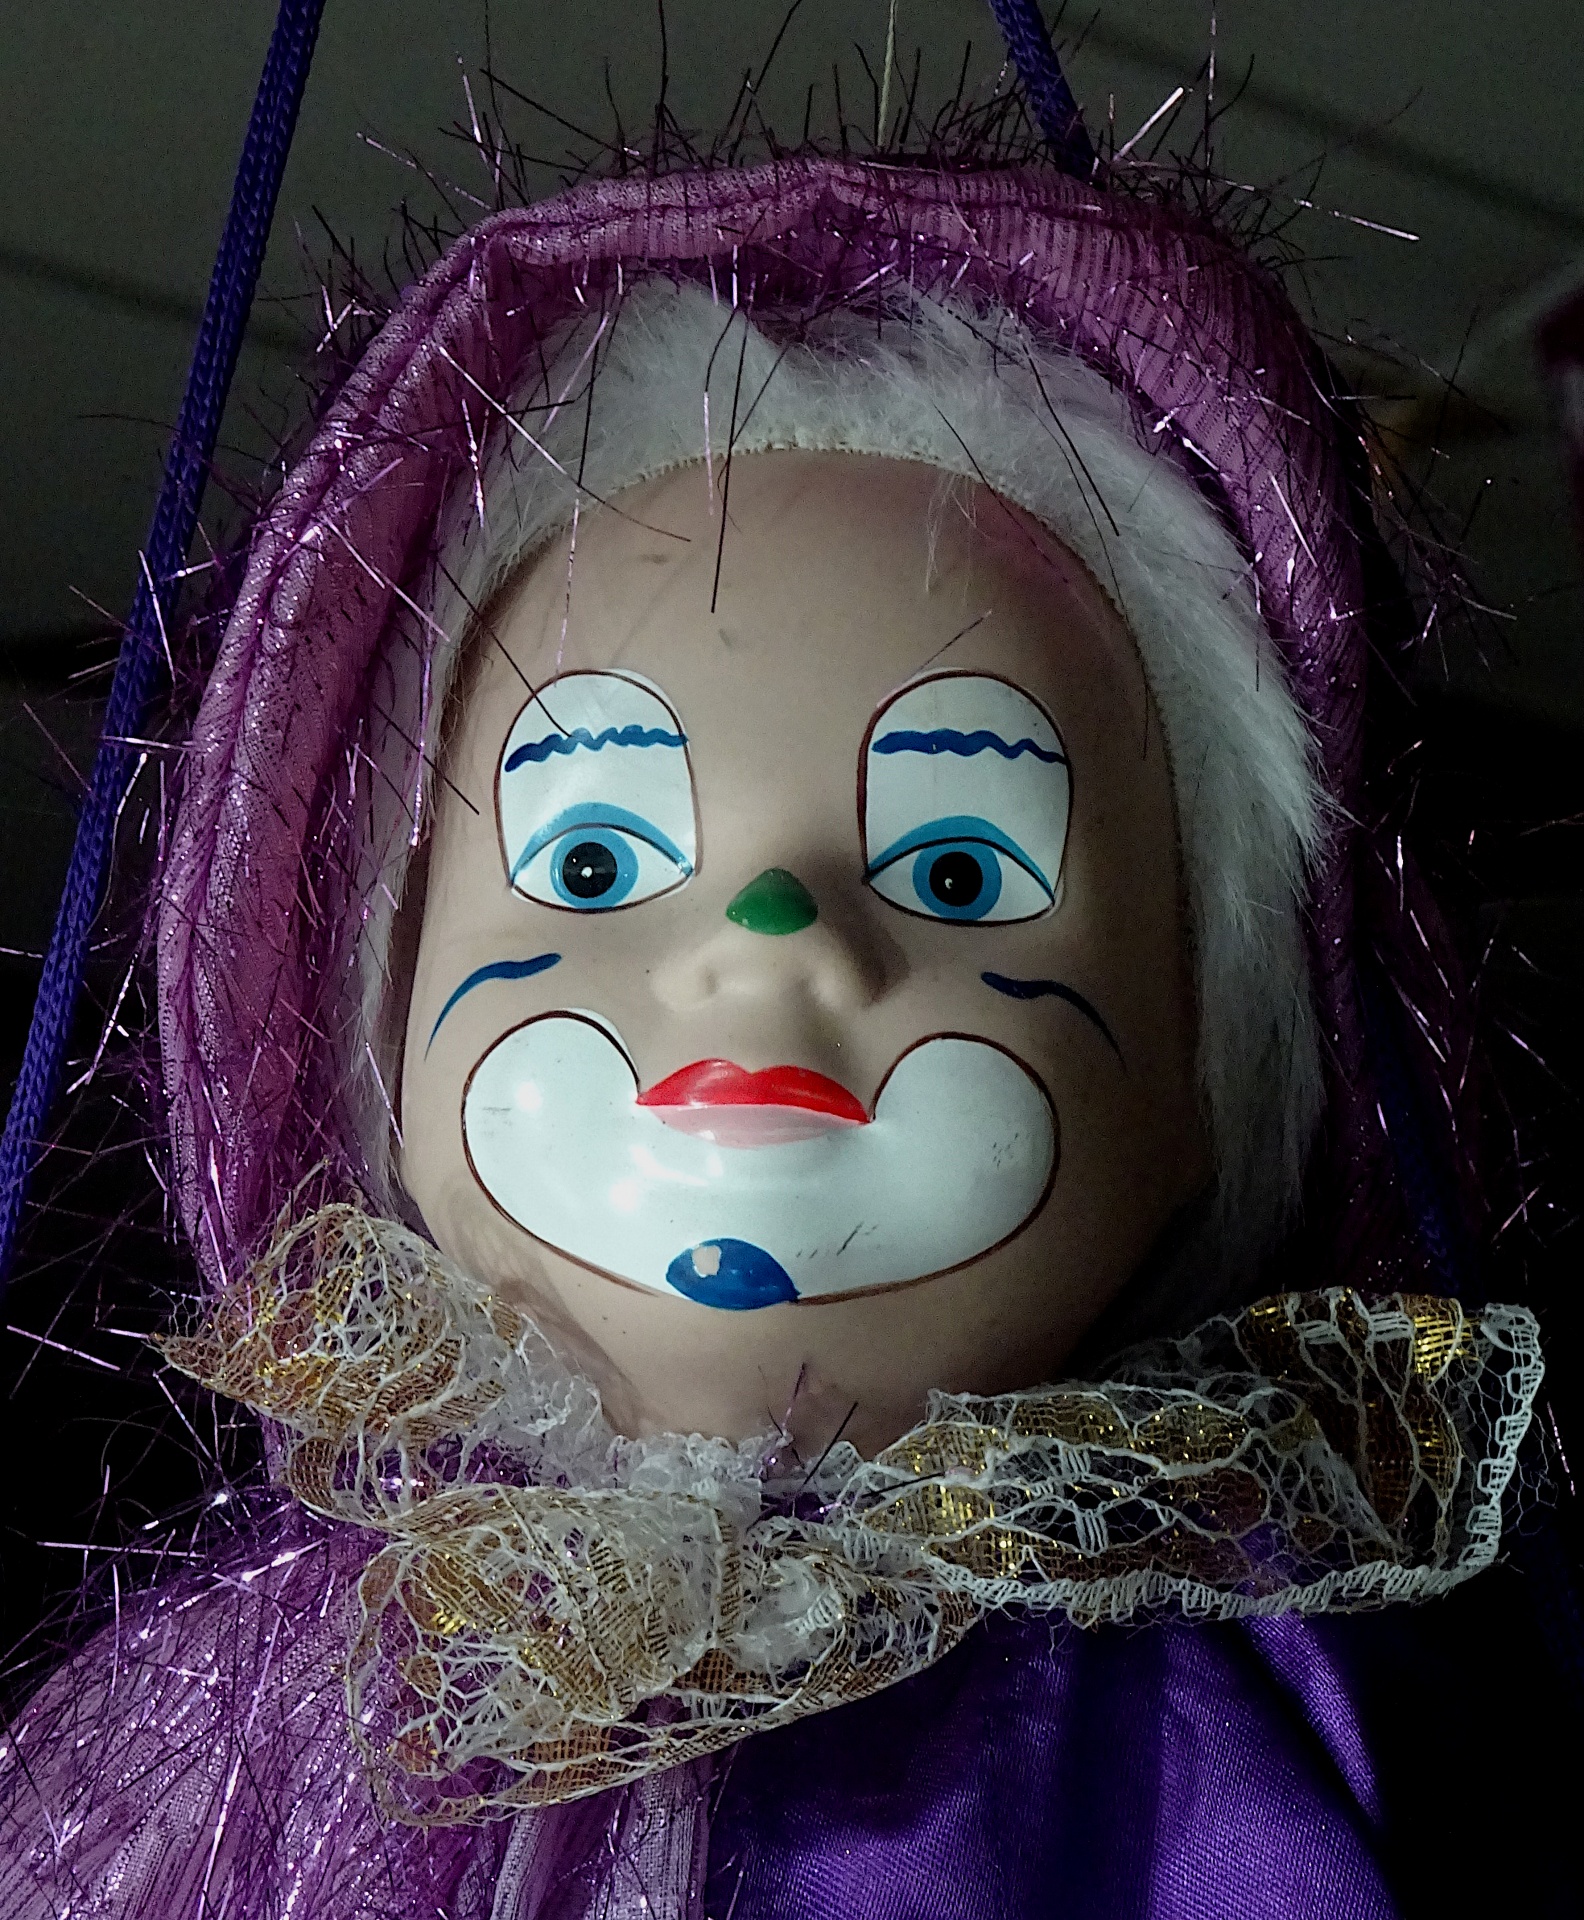 Scary Clown Puppet Doll